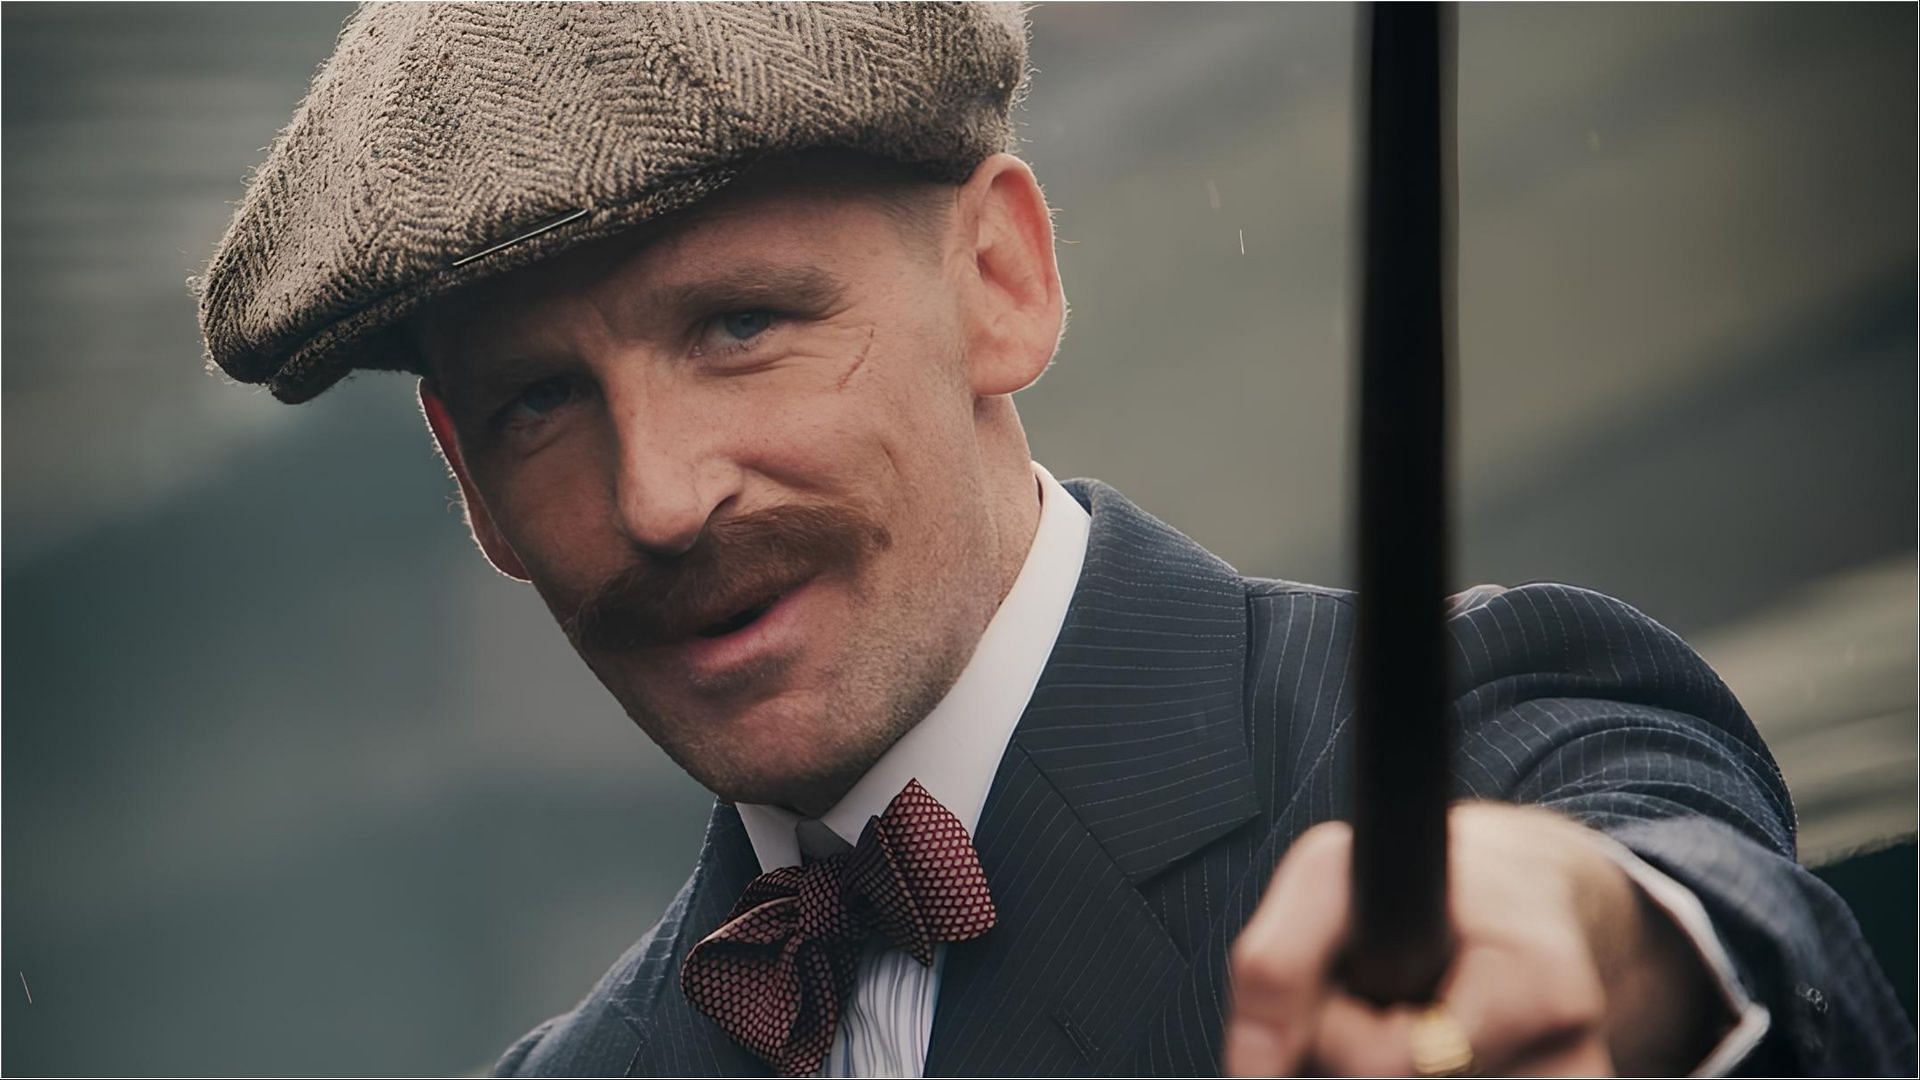 Paul Anderson has been ordered by the court to pay a fine after he was arrested in December 2023 (Image via peakyblindersofficial/Instagram)